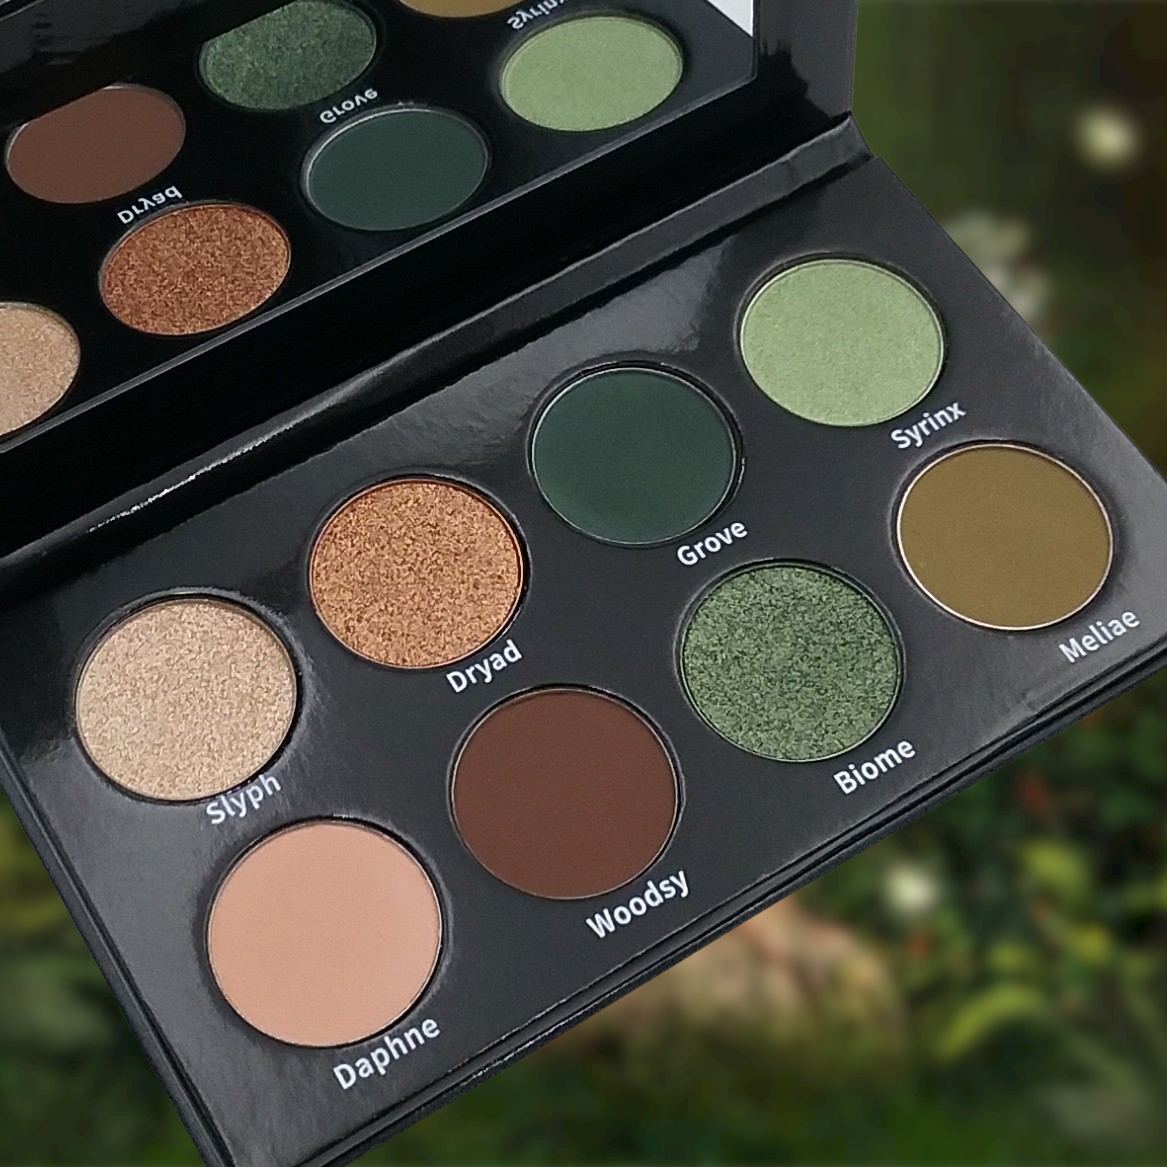 Forest Nymph Eyeshadow Palette